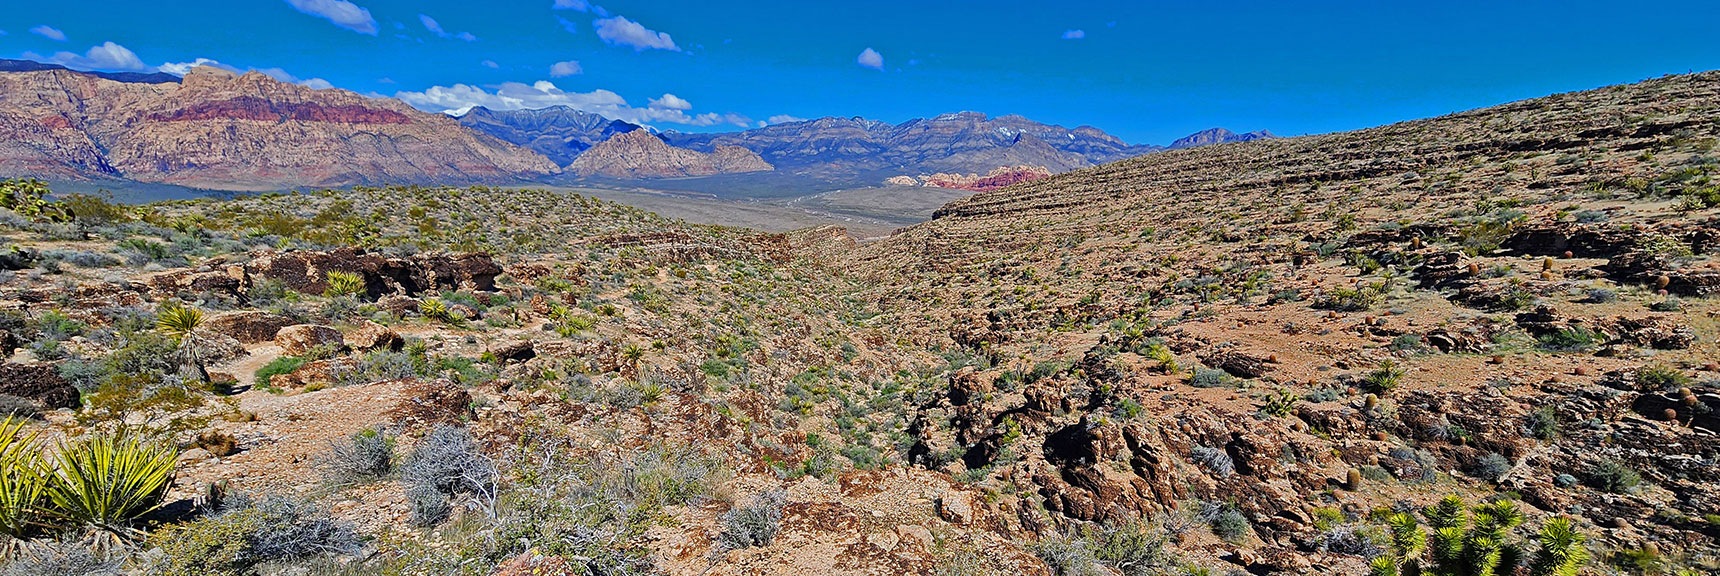 View Back Down from the Upper End of Fossil Canyon. | Fossil Canyon | Cowboy Canyon | Blue Diamond Hill, Nevada